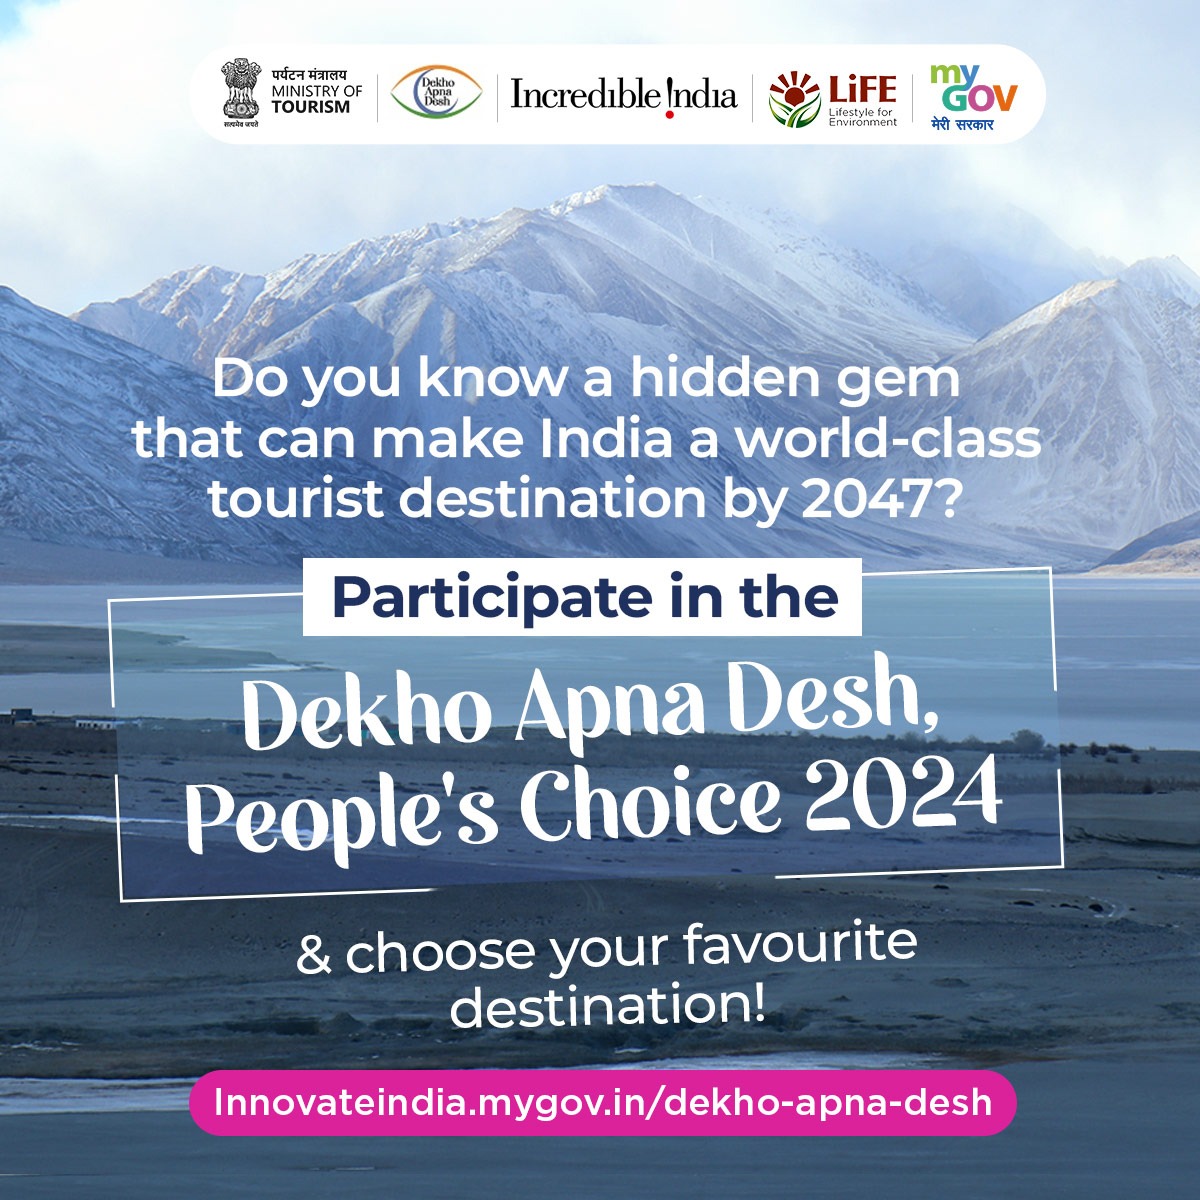 Explore the beauty of India! Join the Dekho Apna Desh People’s Choice 2024 and discover the diverse culture, heritage, and landscapes of our incredible nation. Visit: innovateindia.mygov.in/dekho-apna-des… #DekhoApnaDesh #IncredibleIndia @tourismgoi